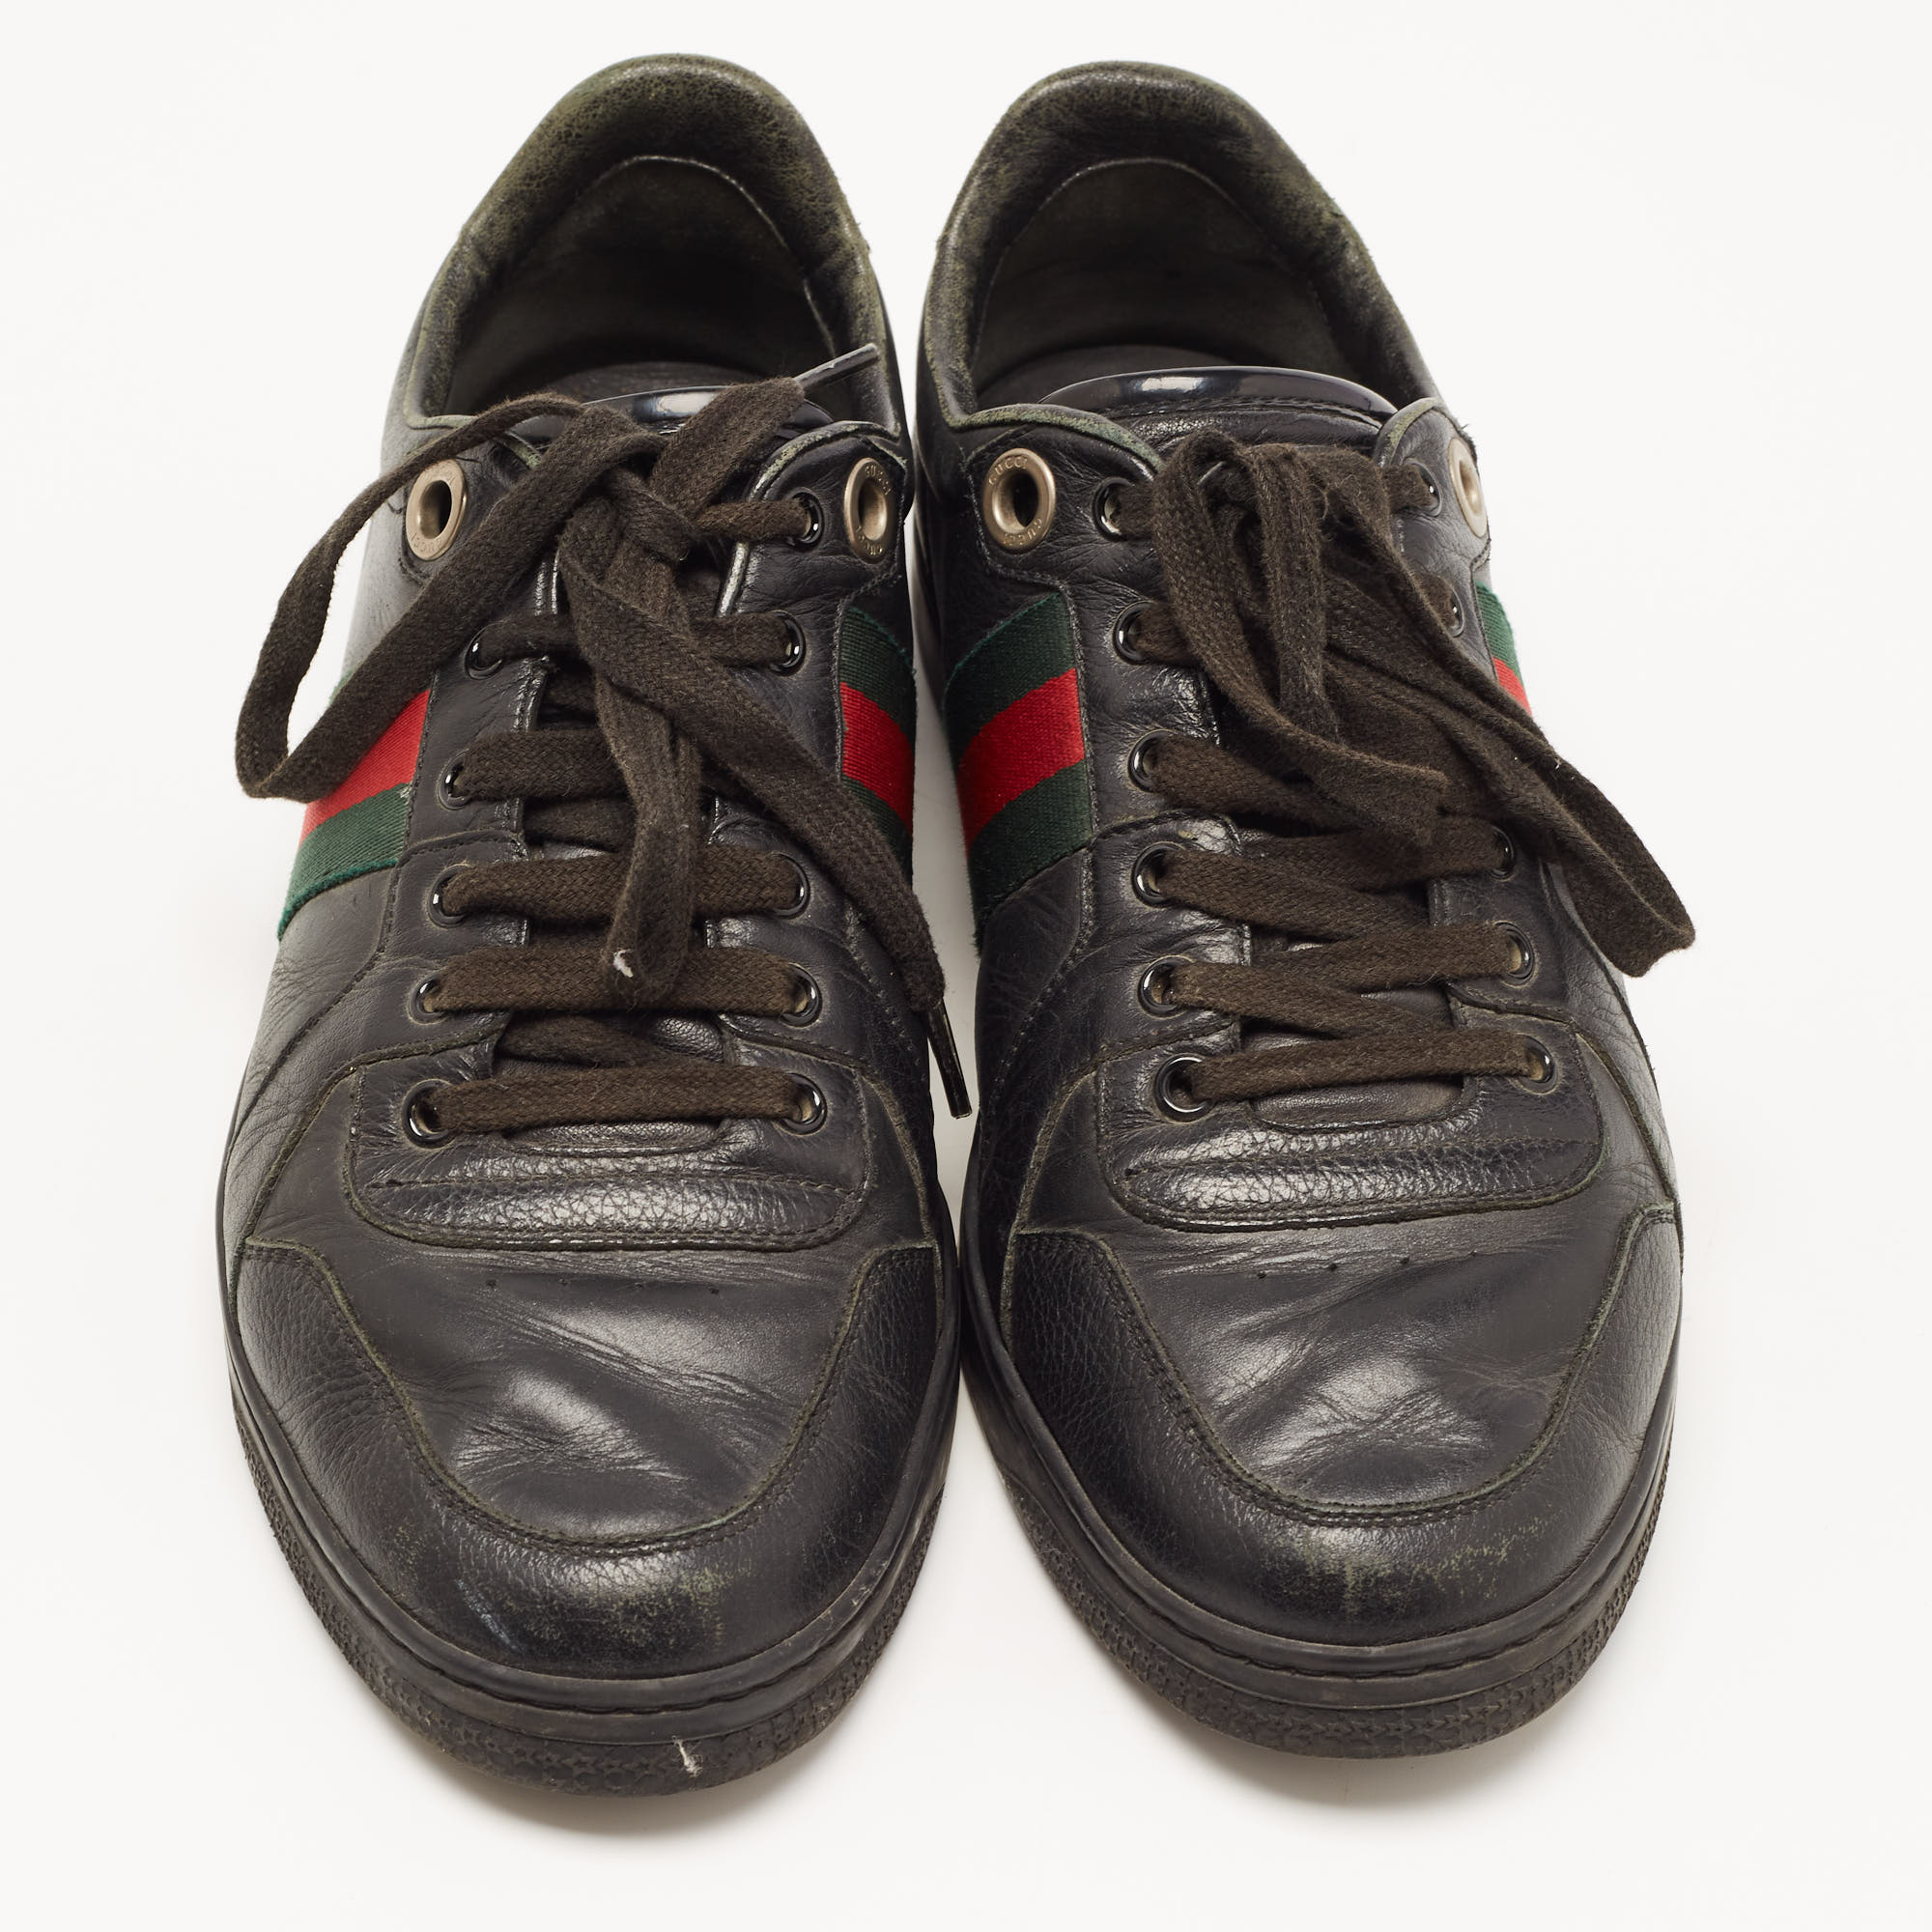 Gucci Black Leather Low Top Sneakers Size 41